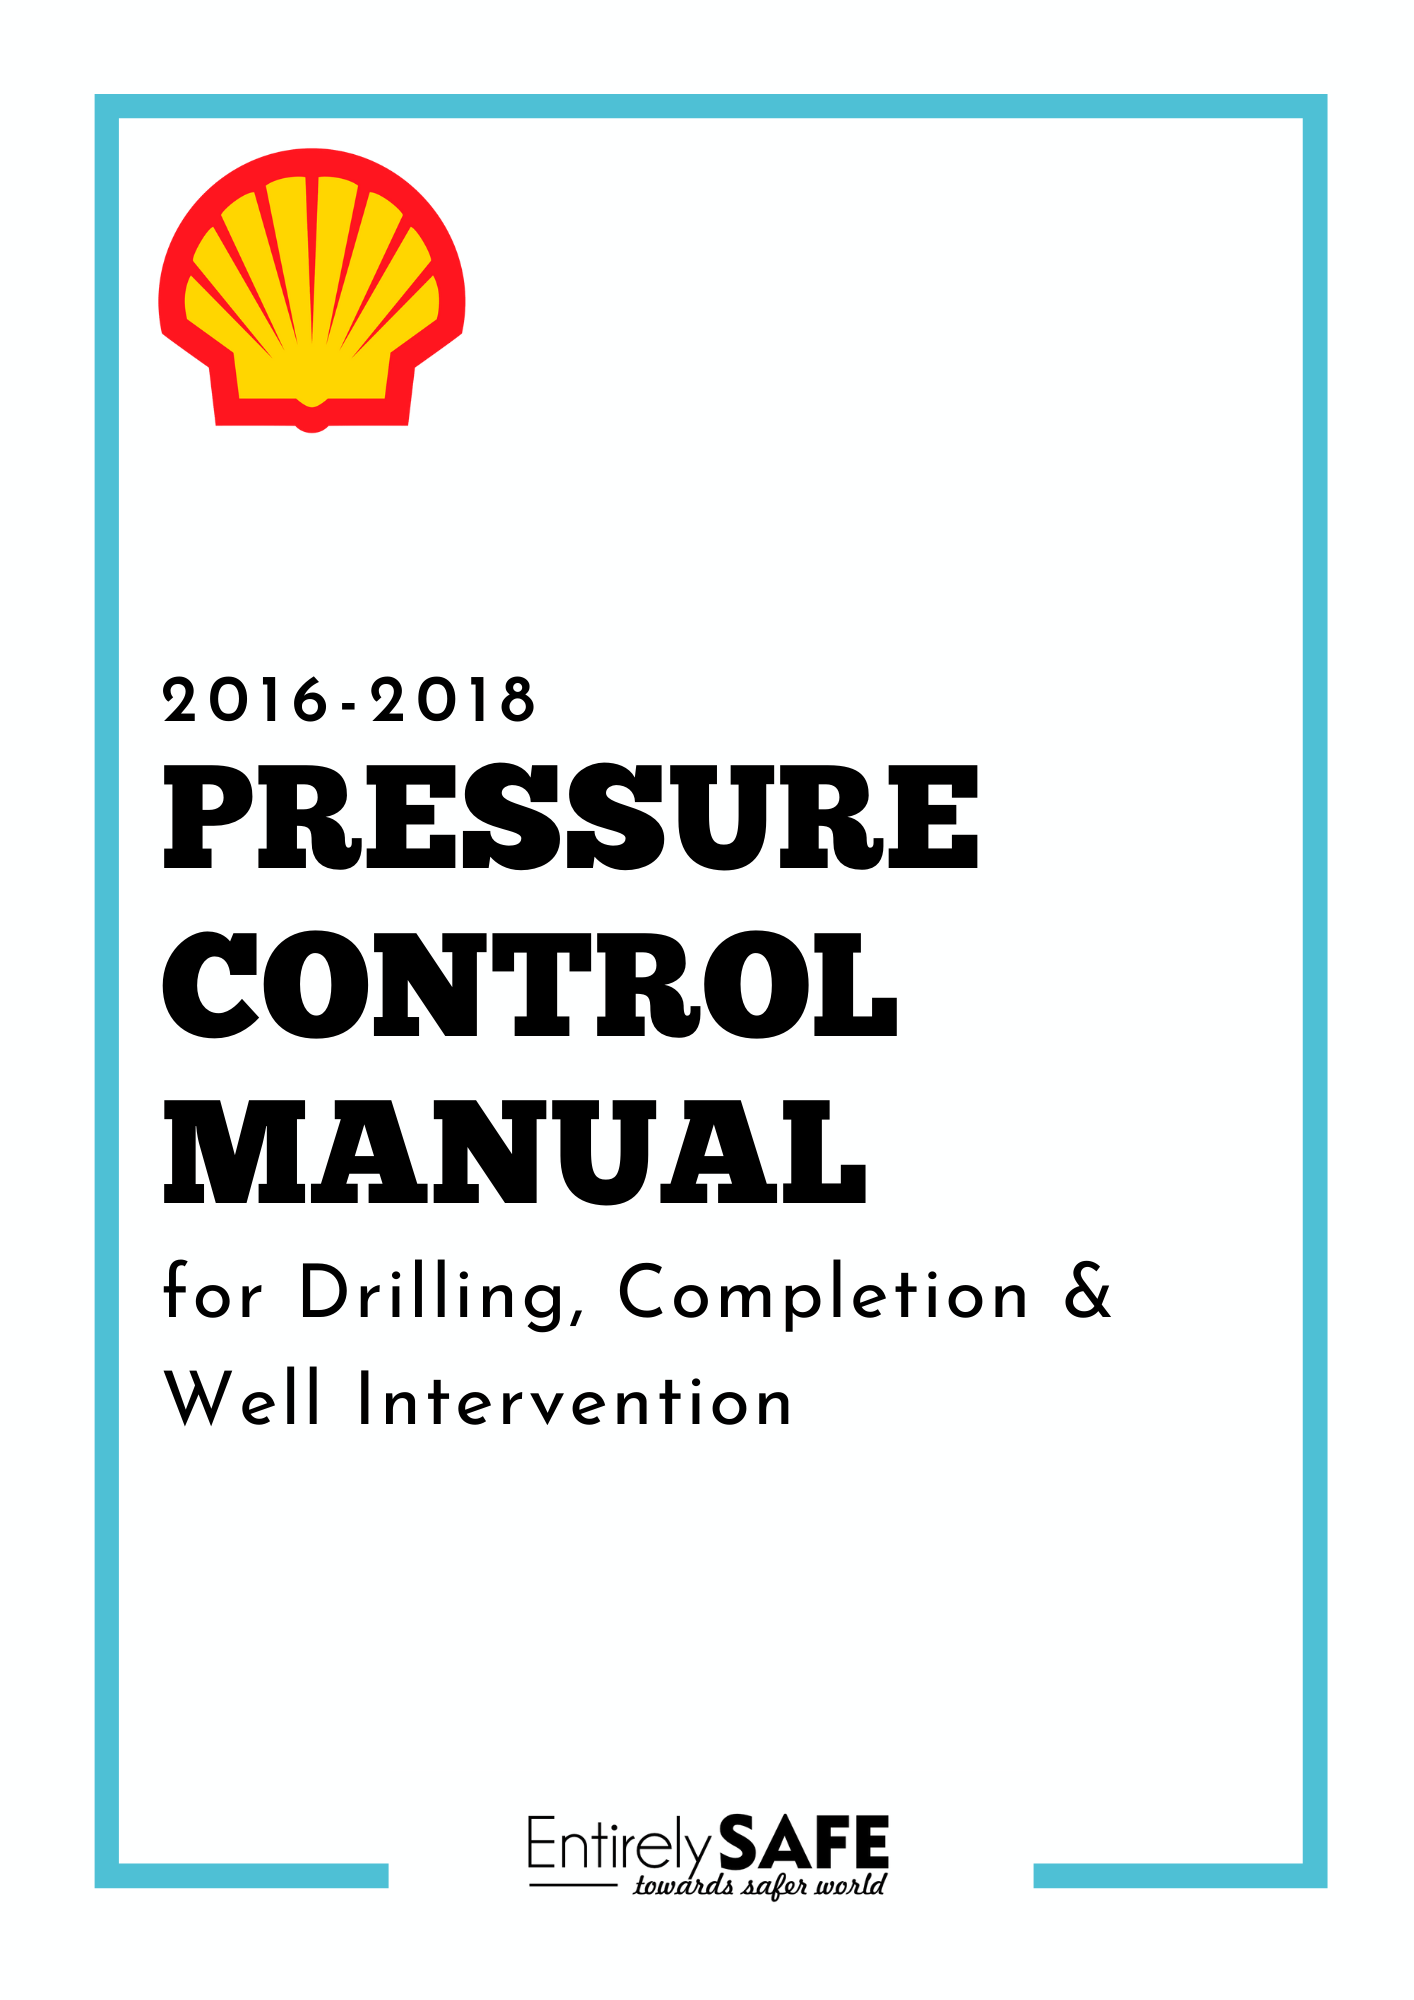 156-Shell-Pressure-Control-Manual-for-Drilling-Completion-and-Well-Intervention-Operations-Manual